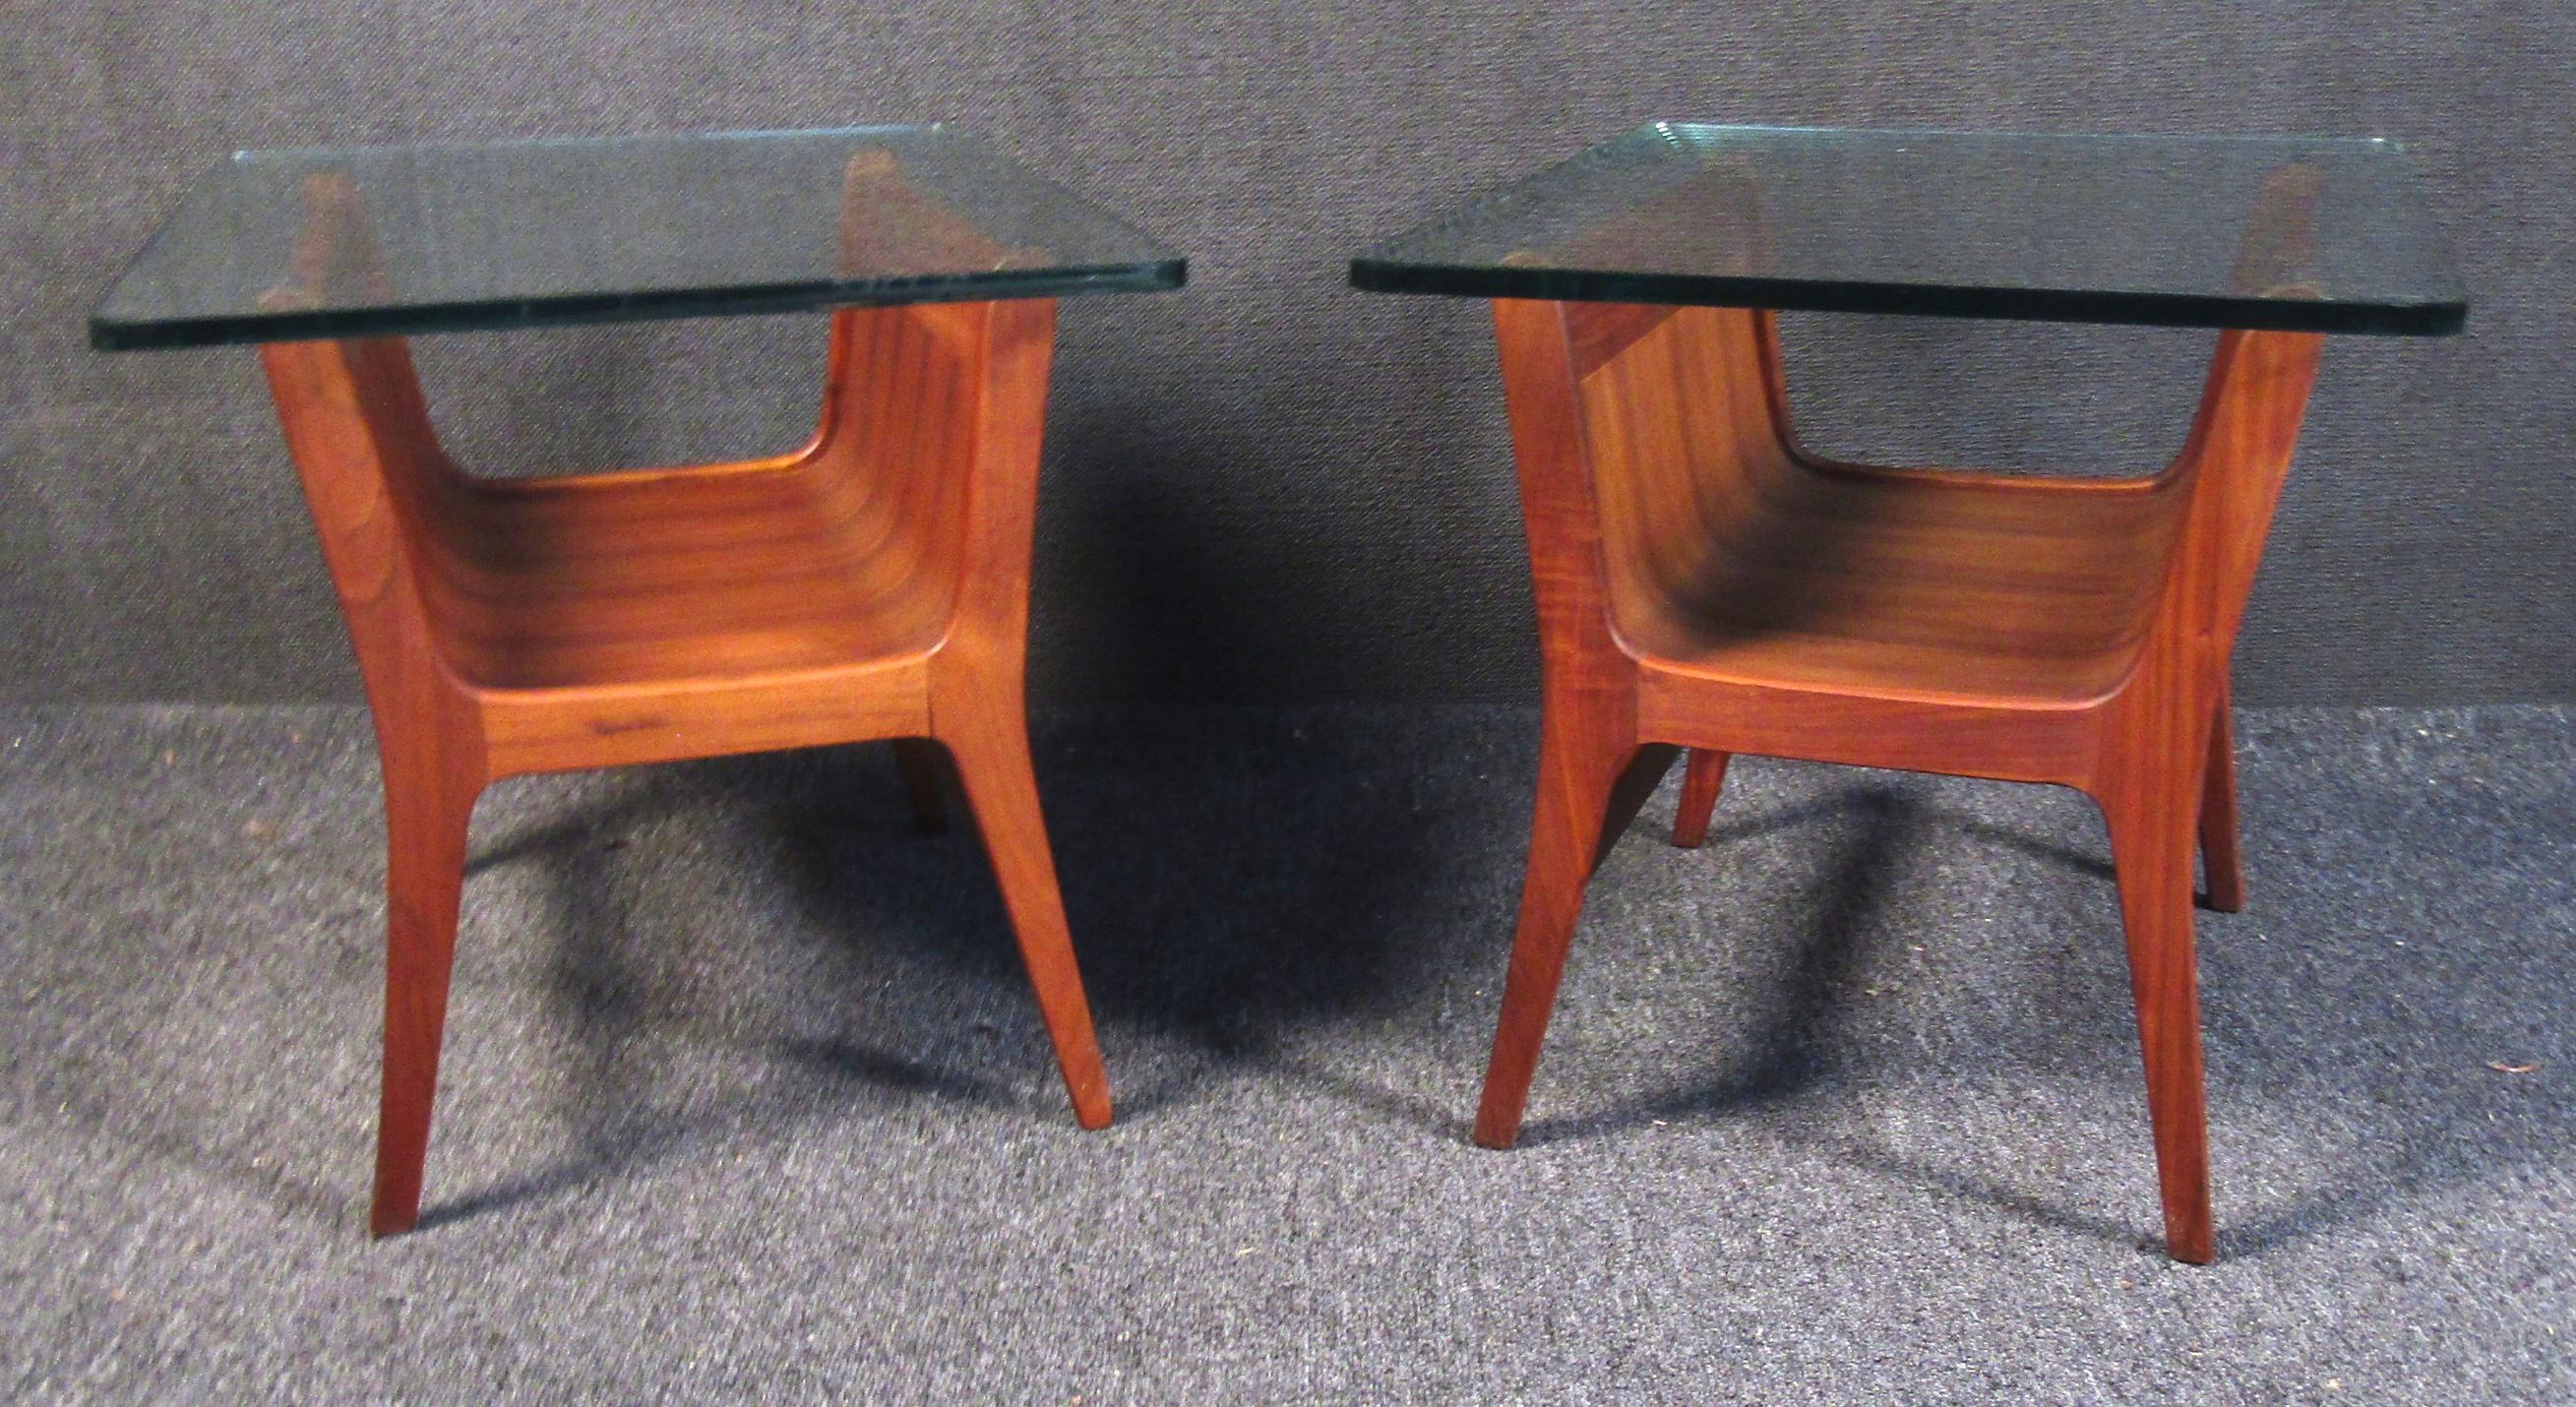 Set of two vintage modern side tables. These tables feature curving sculptural boomerang shaped wood legs with chic and sturdy thick glass tops, each table has a sizable lower shelf with sculptural curved corners to match the legs.

Please confirm